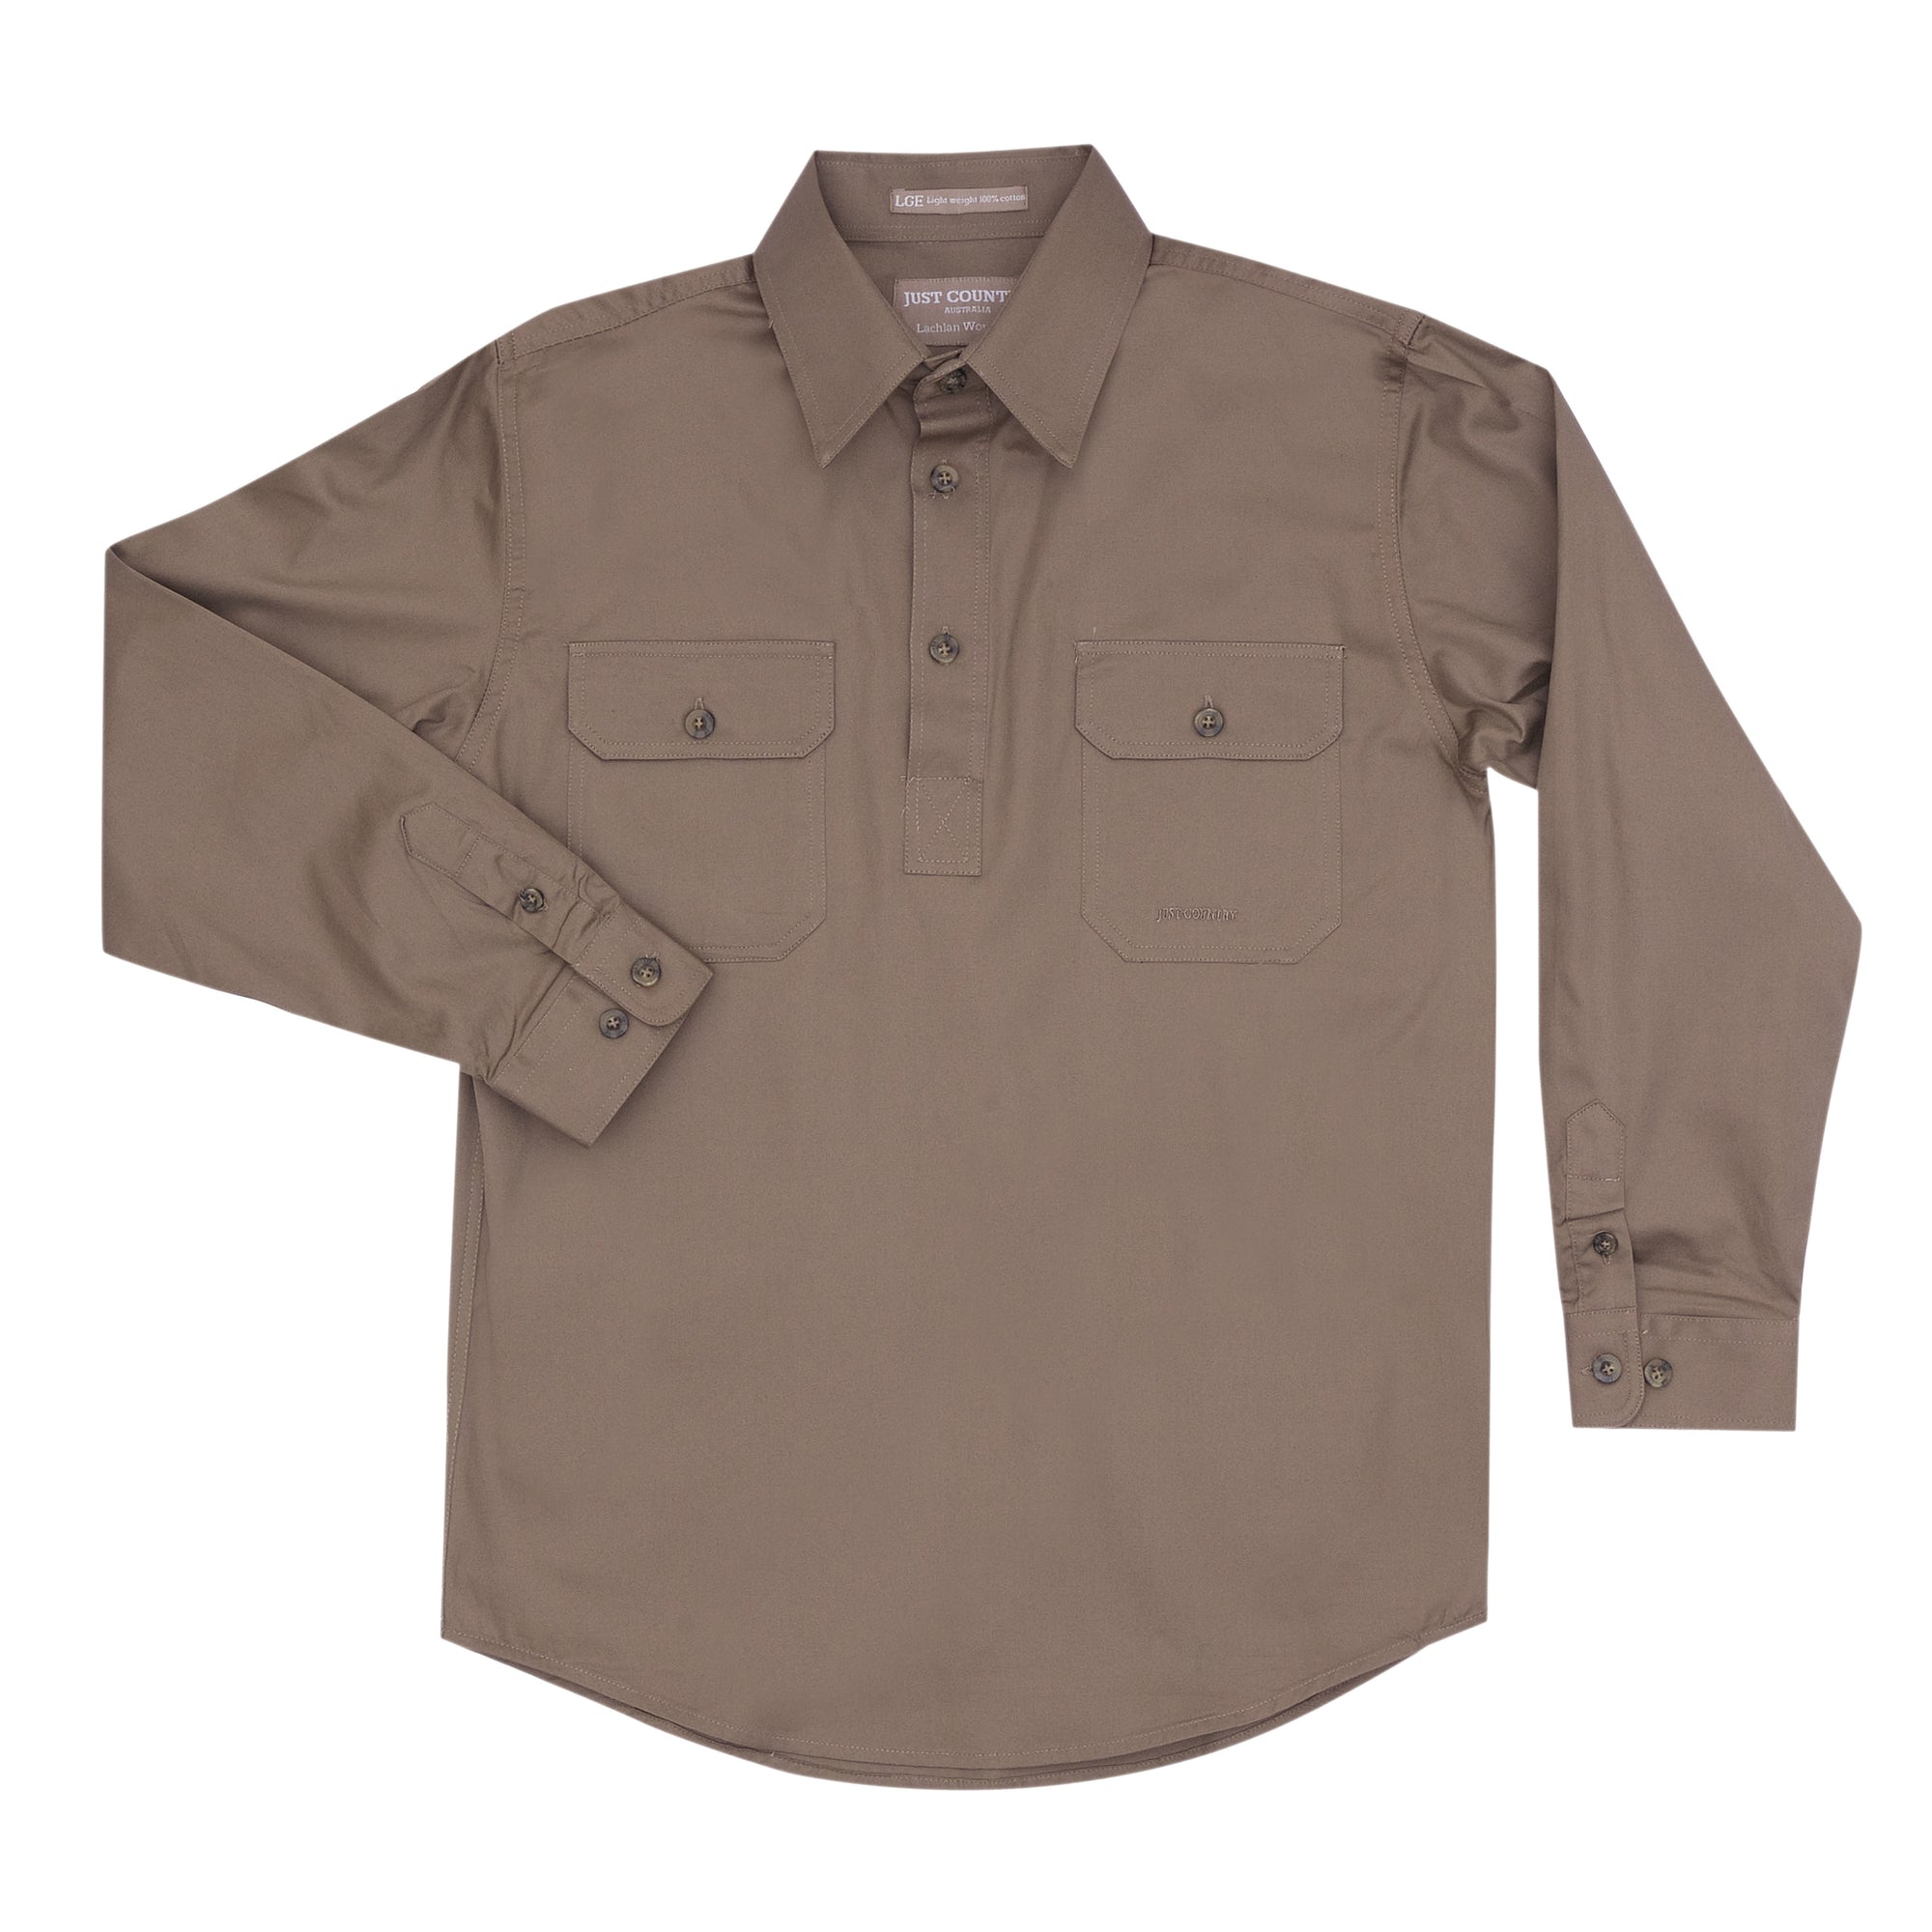 Just Country Workshirt Boys Lachlan Brown